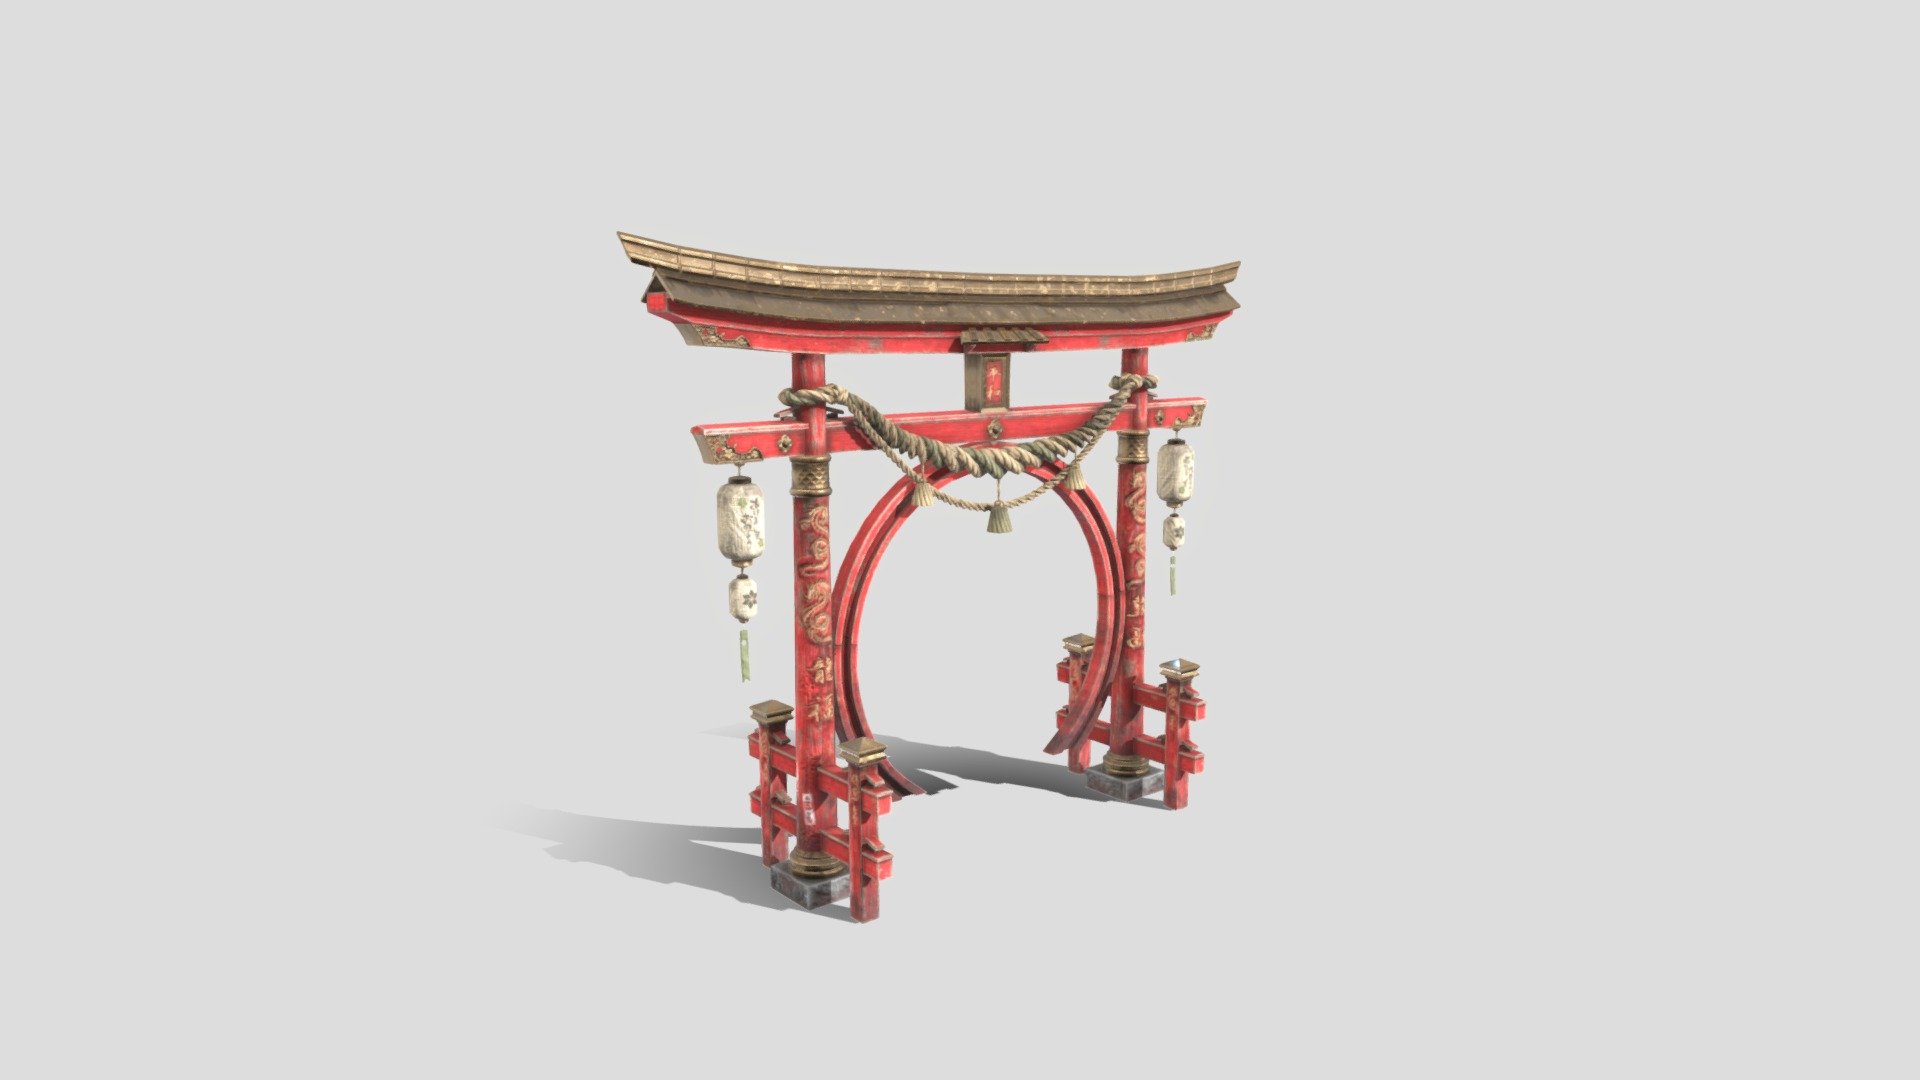 Middle poly model of a Japanese Torii Gate.
 
I've done the high poly sculpt in Zbrush, retopology, UVs in Blender, baked in Marmoset Toolbag, textured in Substance painter.

One texture set: 4096*4096 - Japanese Torii Gate - 3D model by Temyrali (@linatemyrova) 3d model